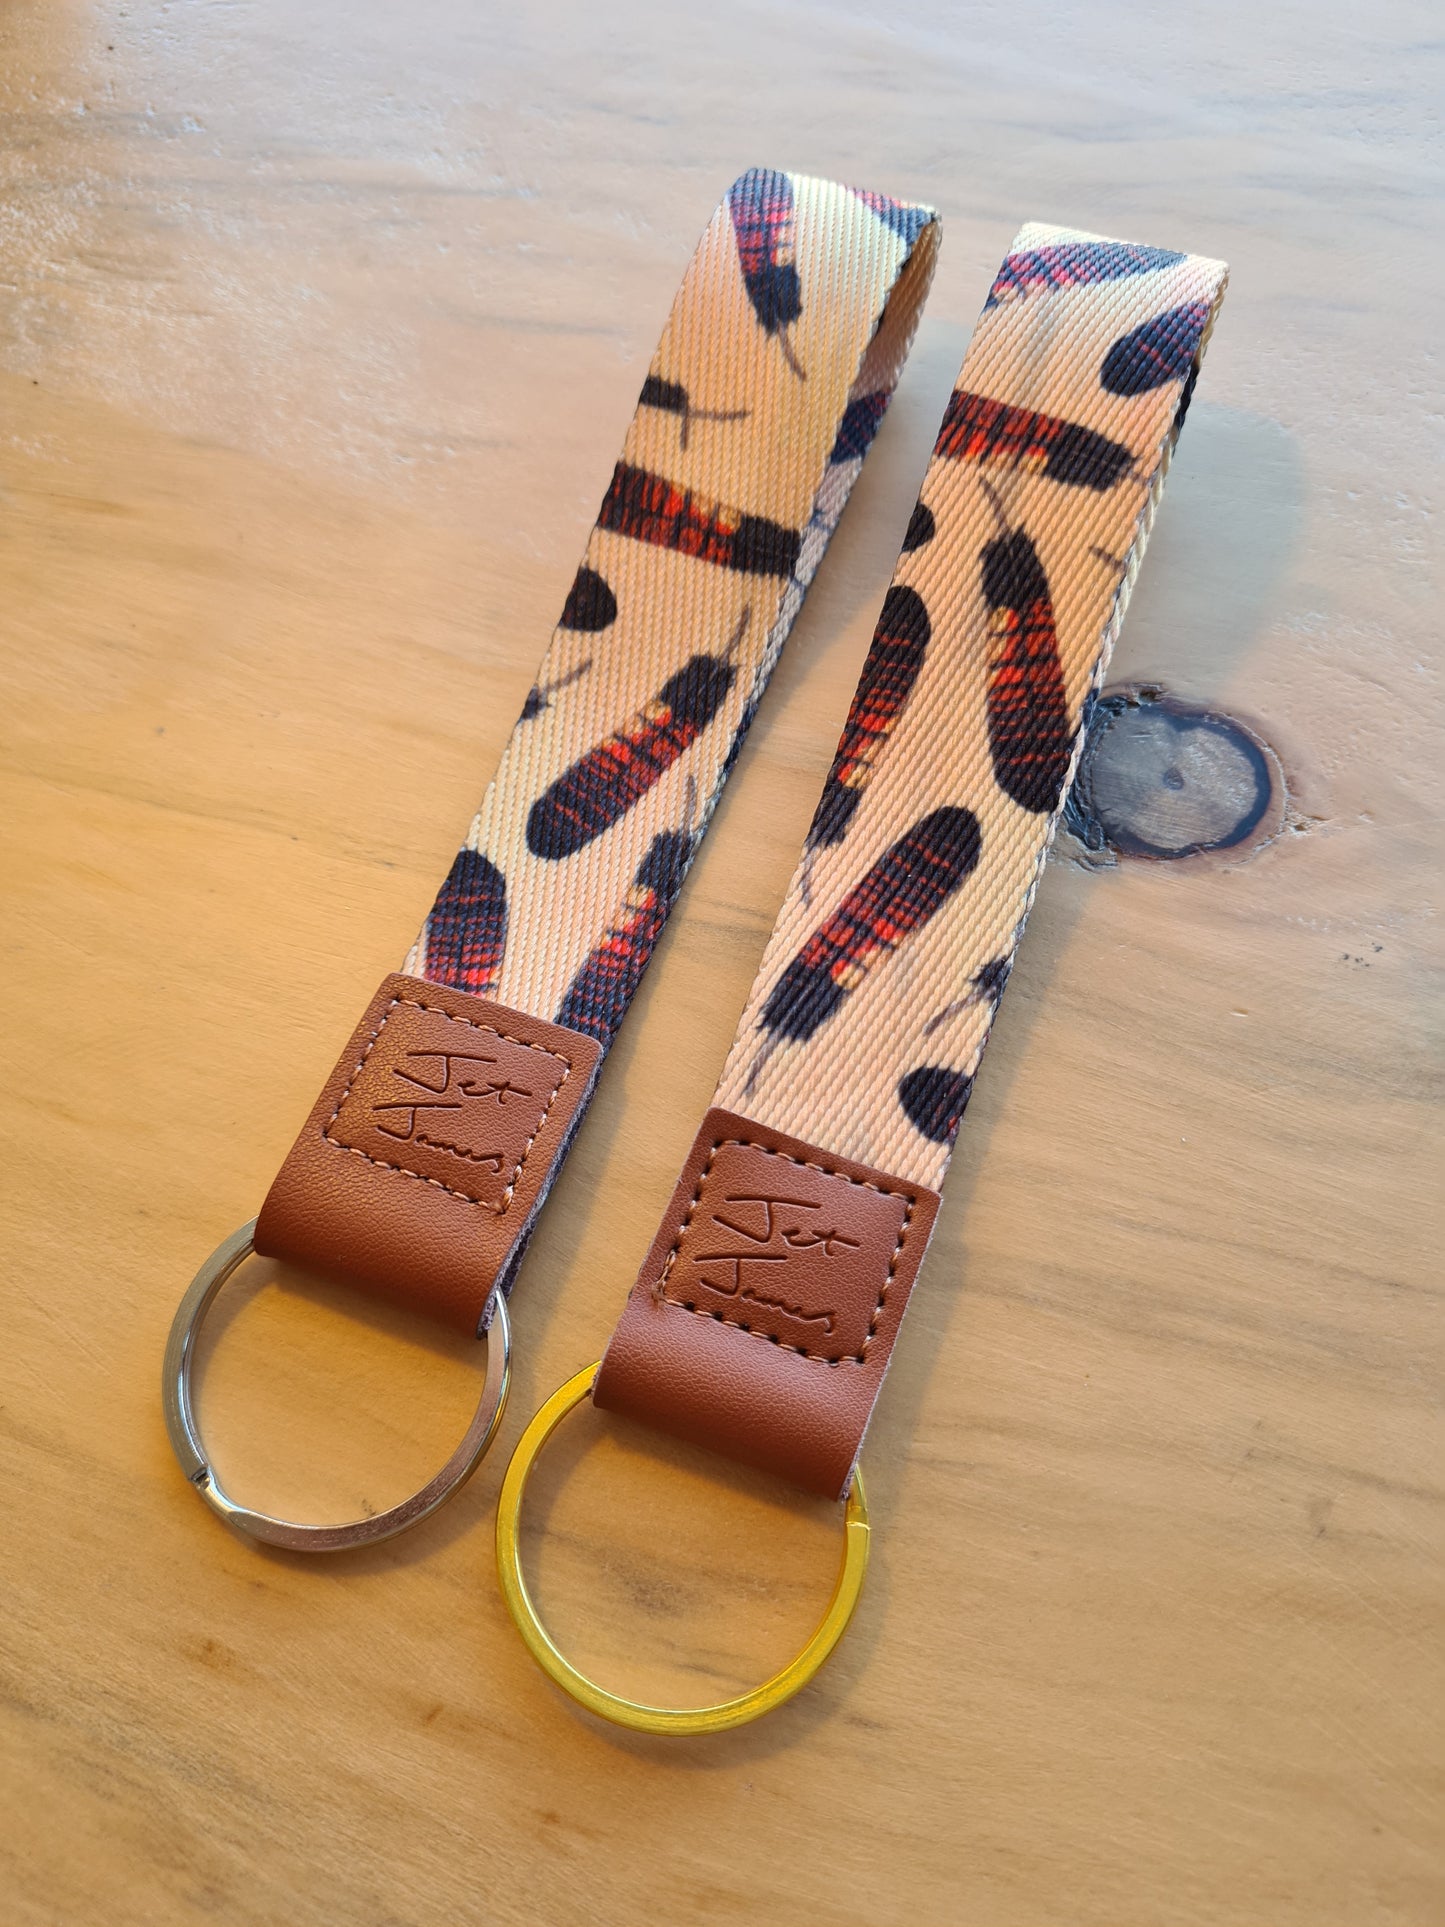 Lanyard Keychain - Red-Tail Feathers